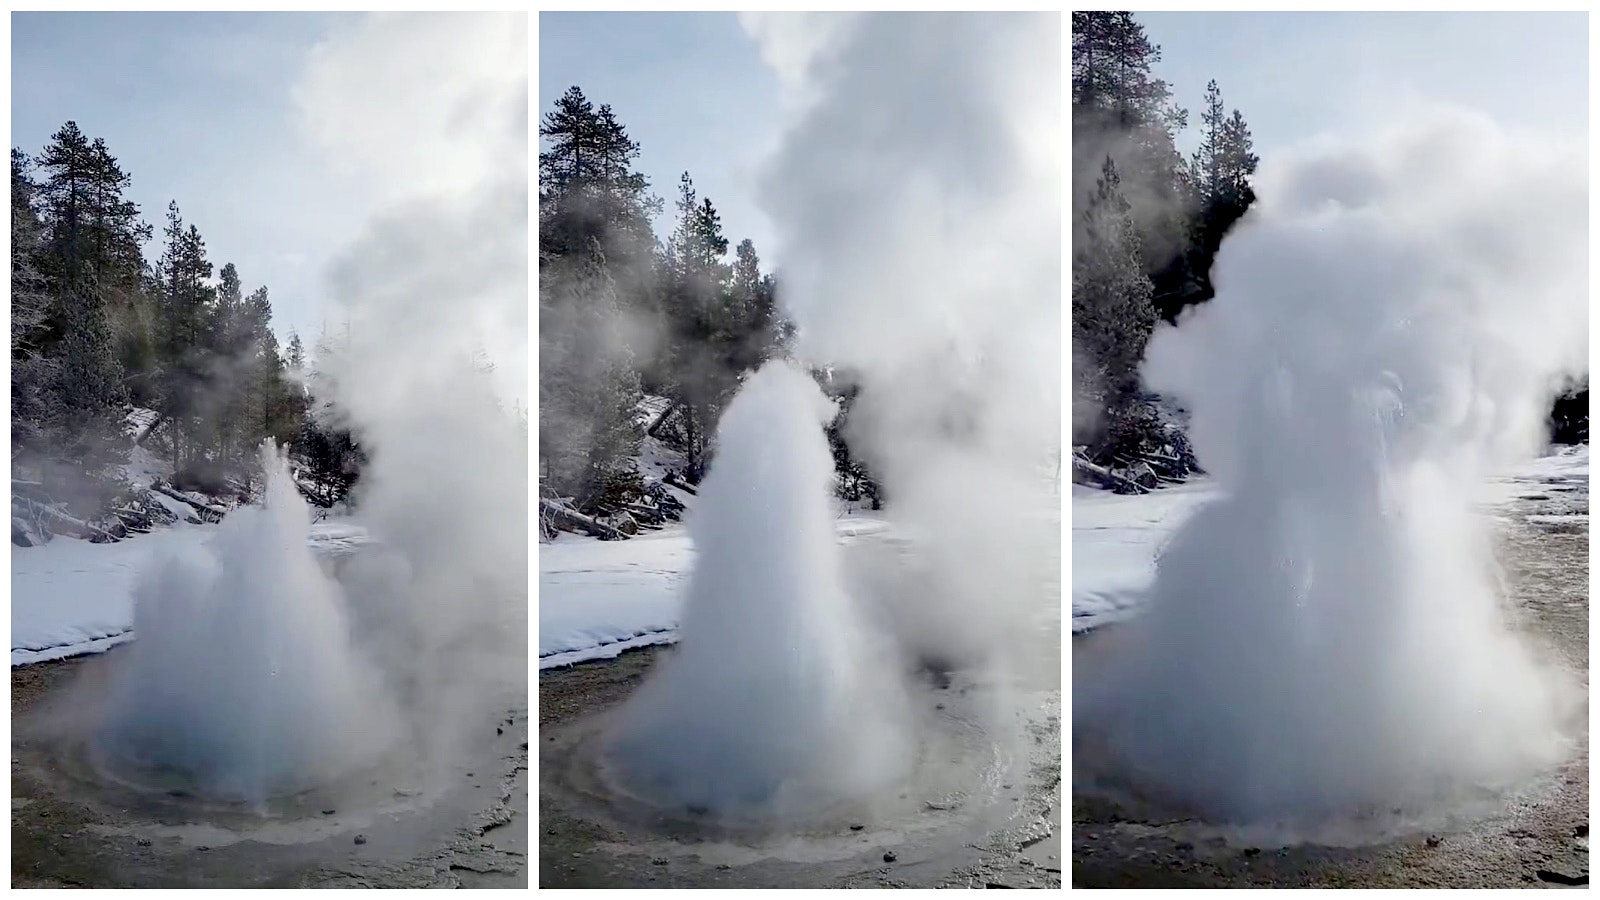 Economic Geyser in Yellowstone National Park erupts Jan. 7, 2023, the first time it's blown since 1999.